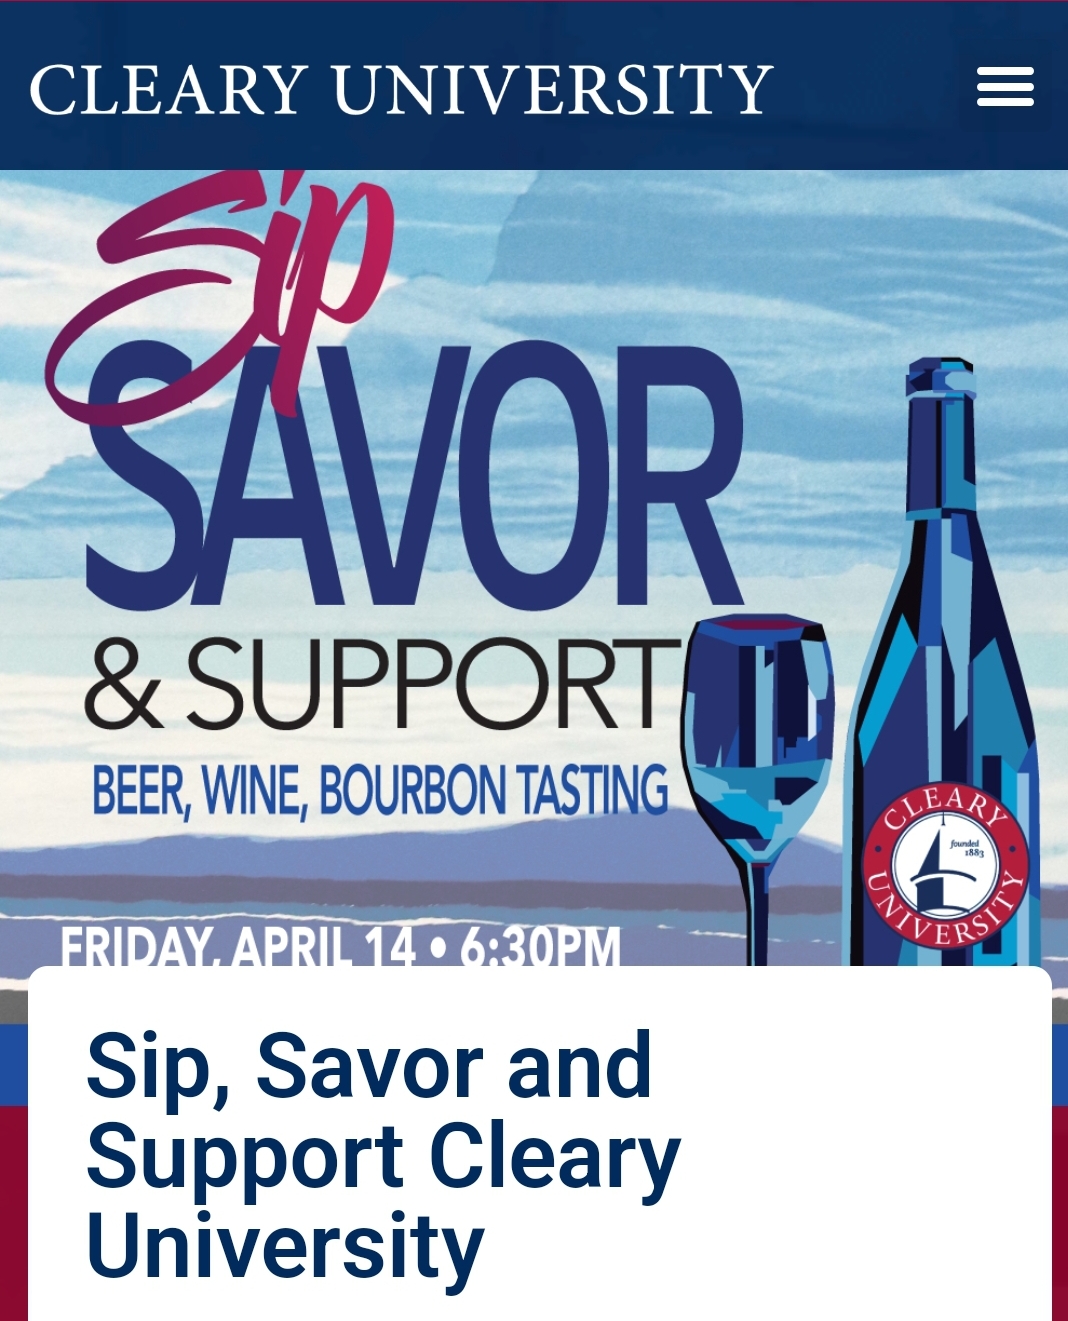 Sip, Savor and Support Cleary University April, 14th Tickets on Sale Now